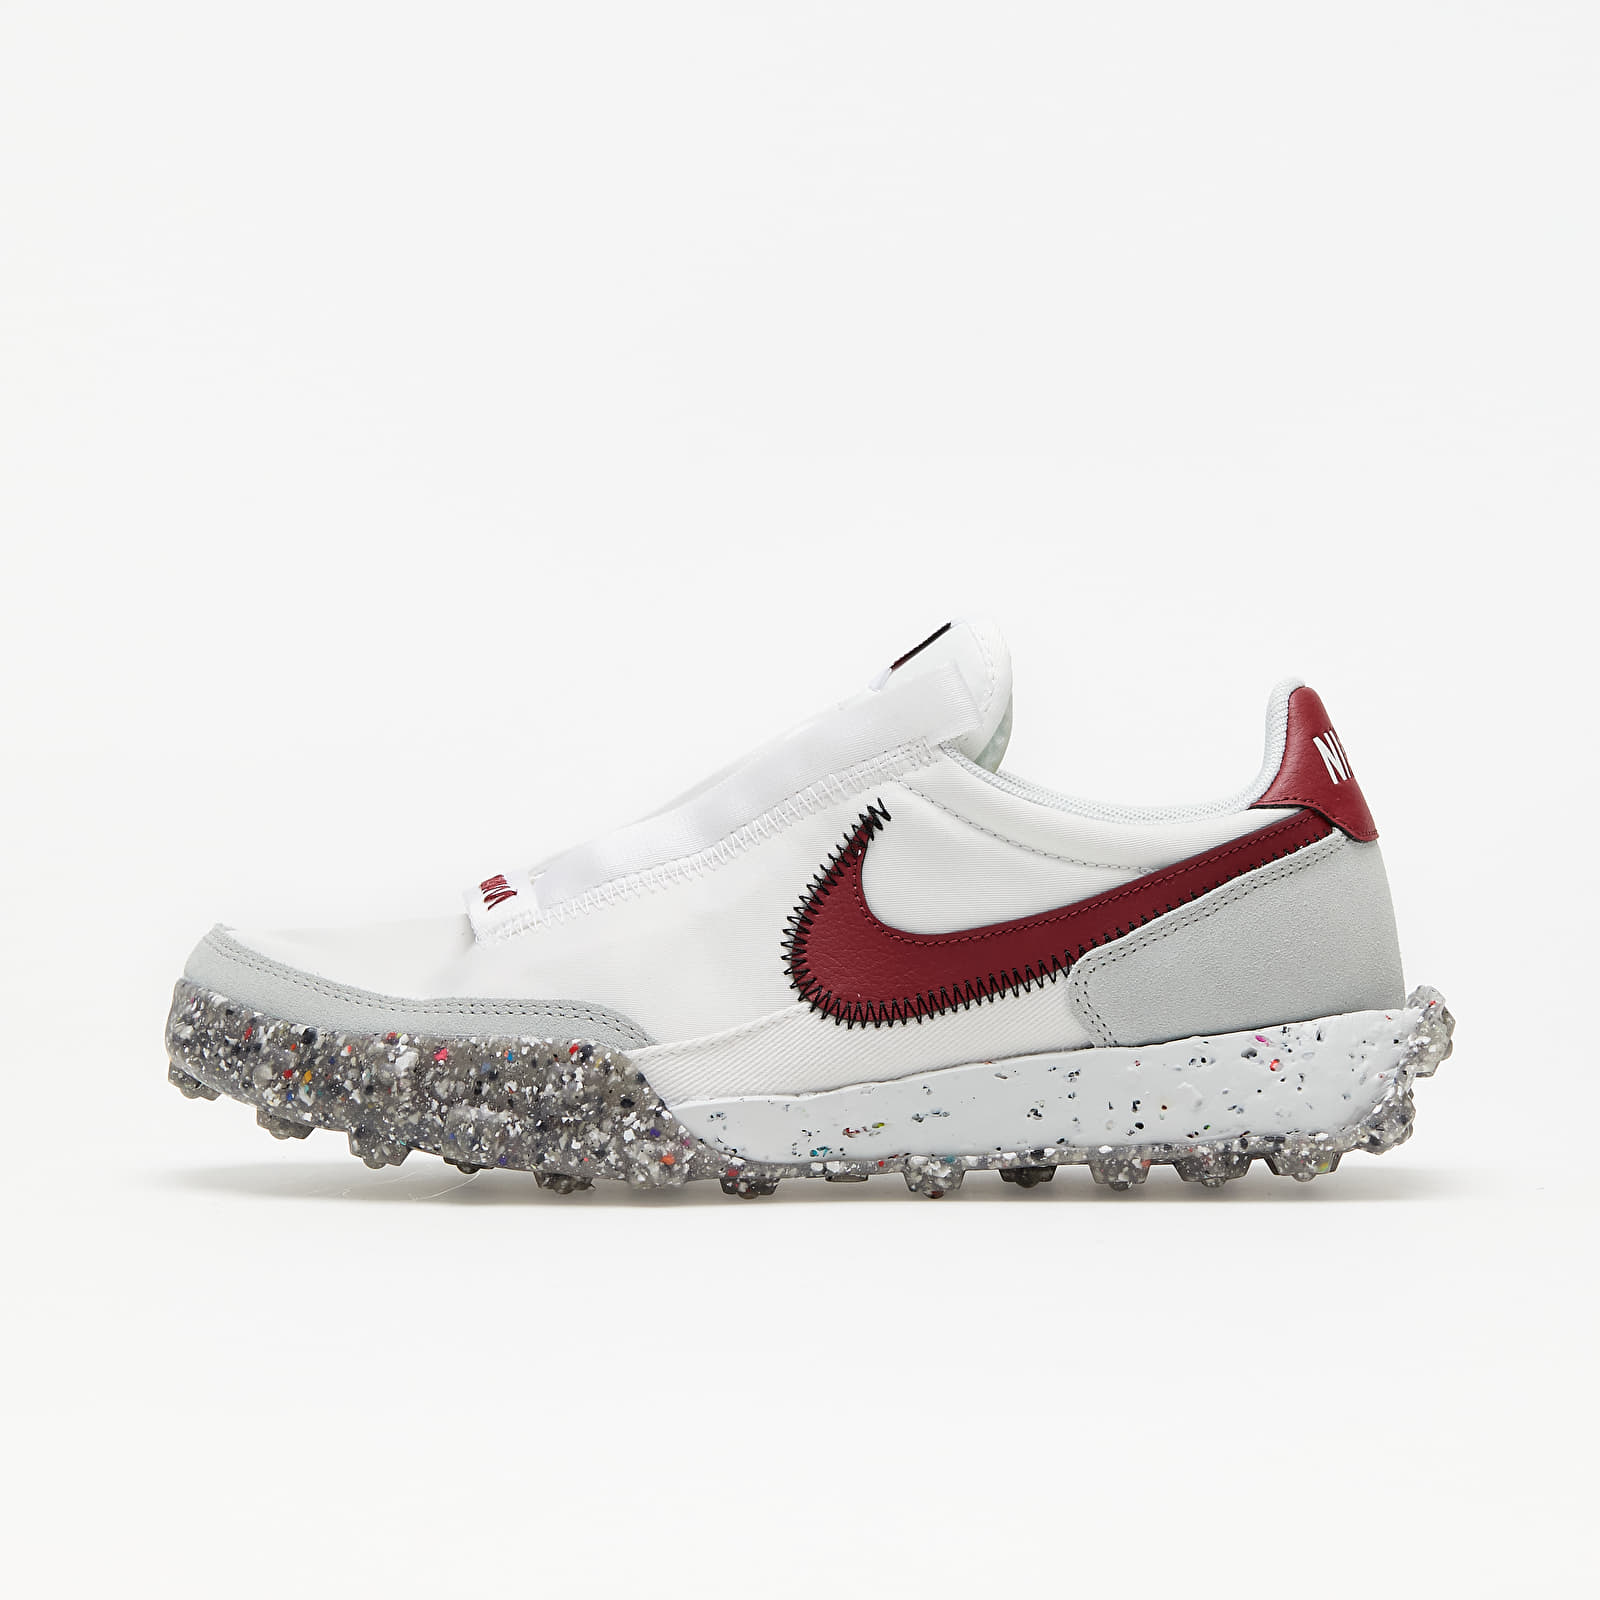 Dámske topánky a tenisky Nike W Waffle Racer Crater Summit White/ Team Red-Photon Dust-Black